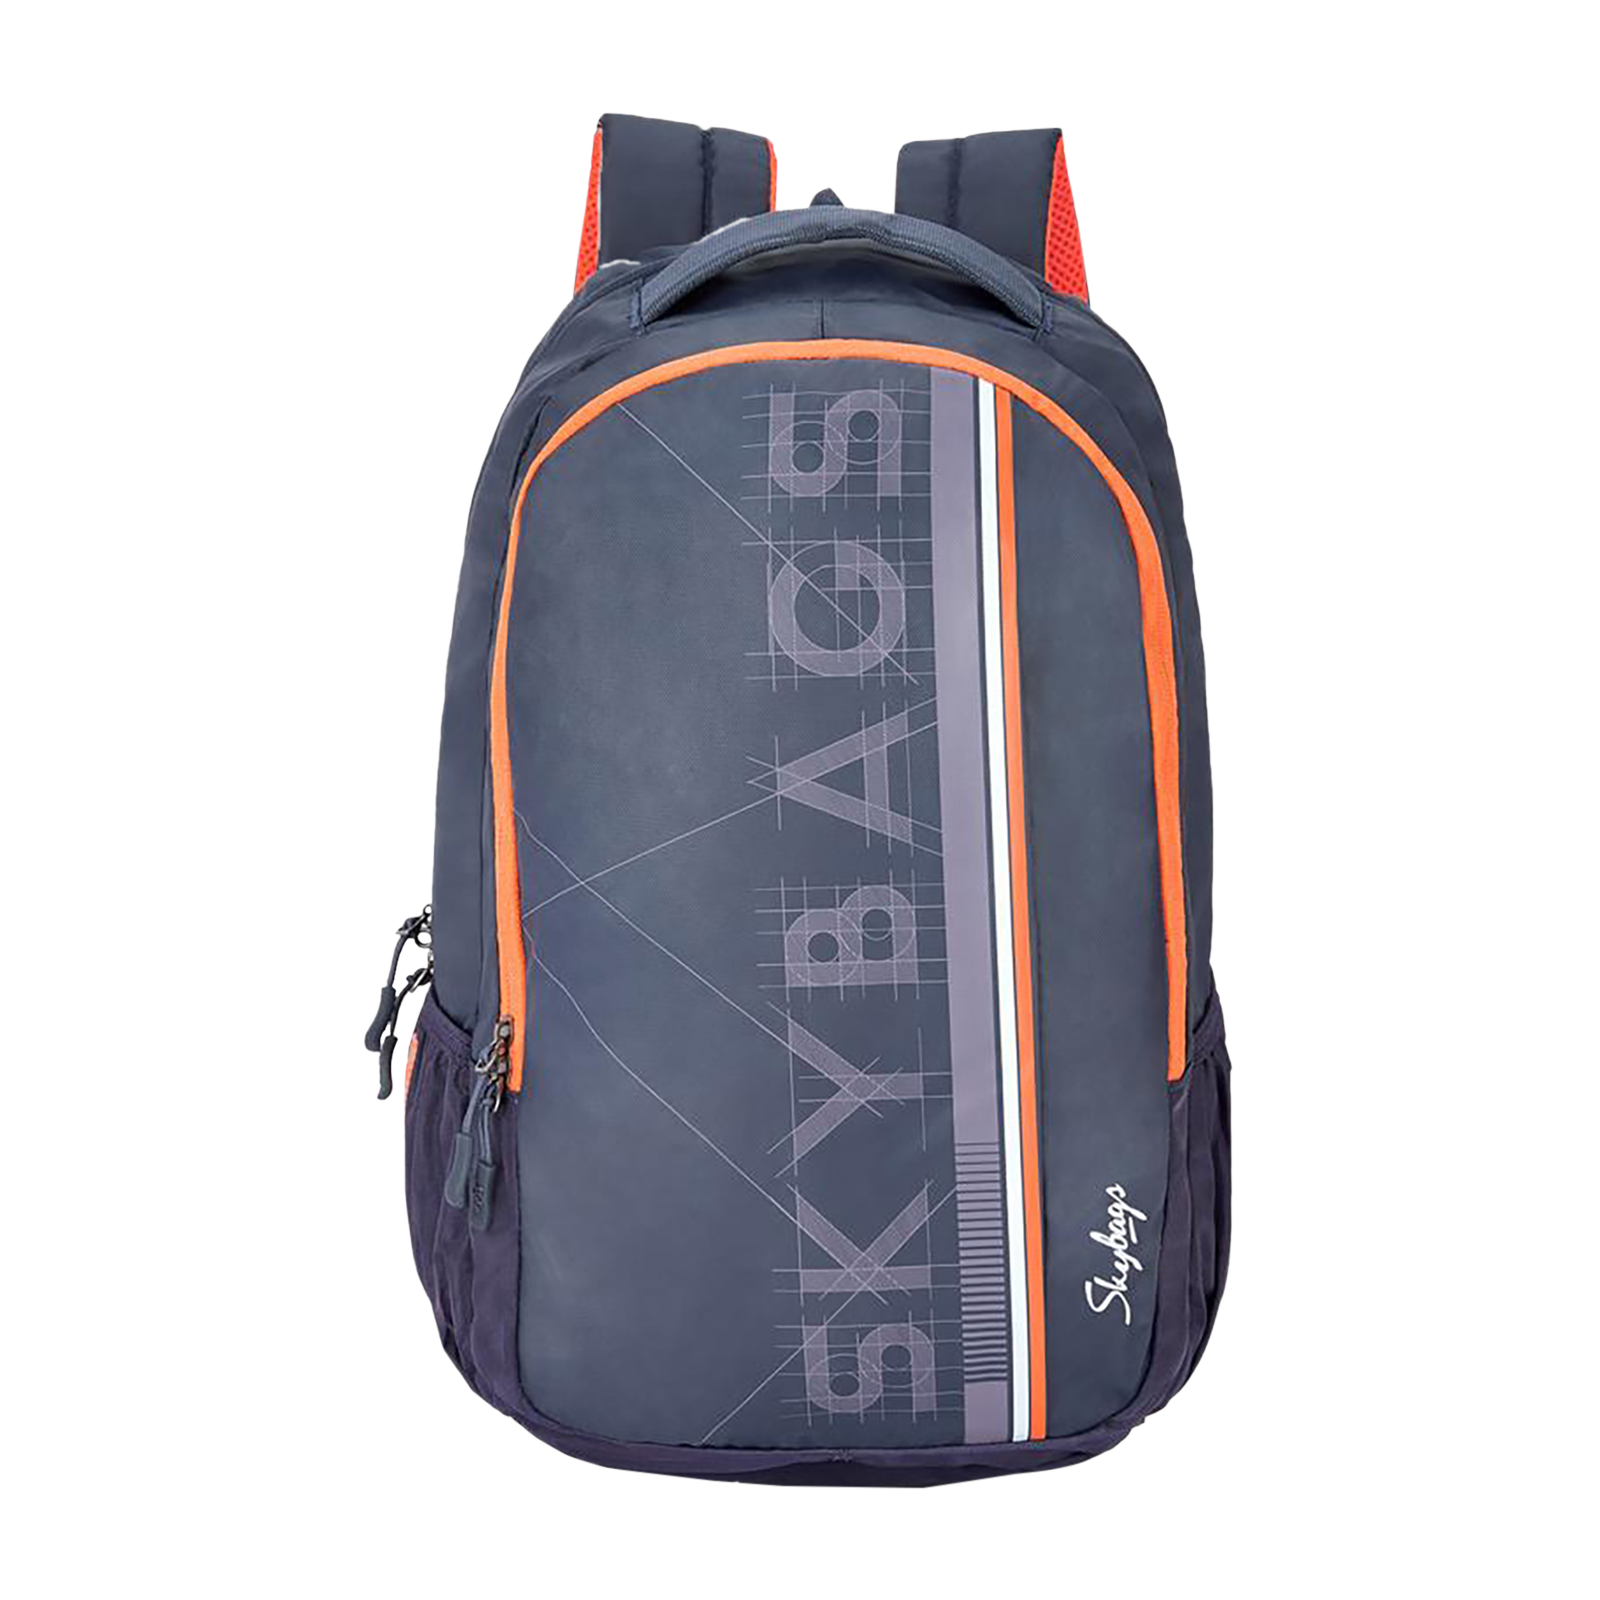 Skybags Crew 4 Laptop Backpack Grey 34 L Laptop Backpack (Grey) in Mumbai  at best price by Skybags - Justdial